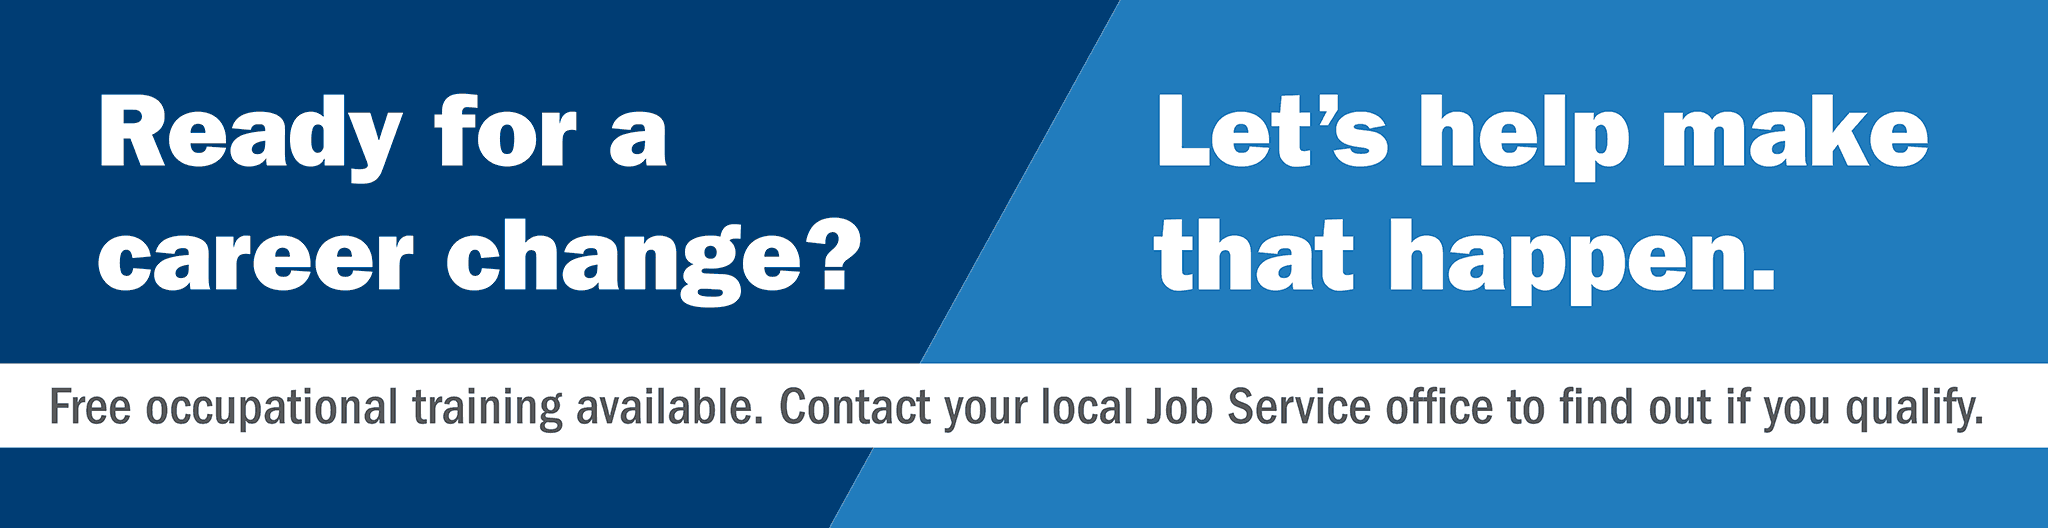 Dark blue background with text: Ready for a career change? Let's help make that happen. Free occupational training available. Contact your local Job Service office to find out if you qualify.